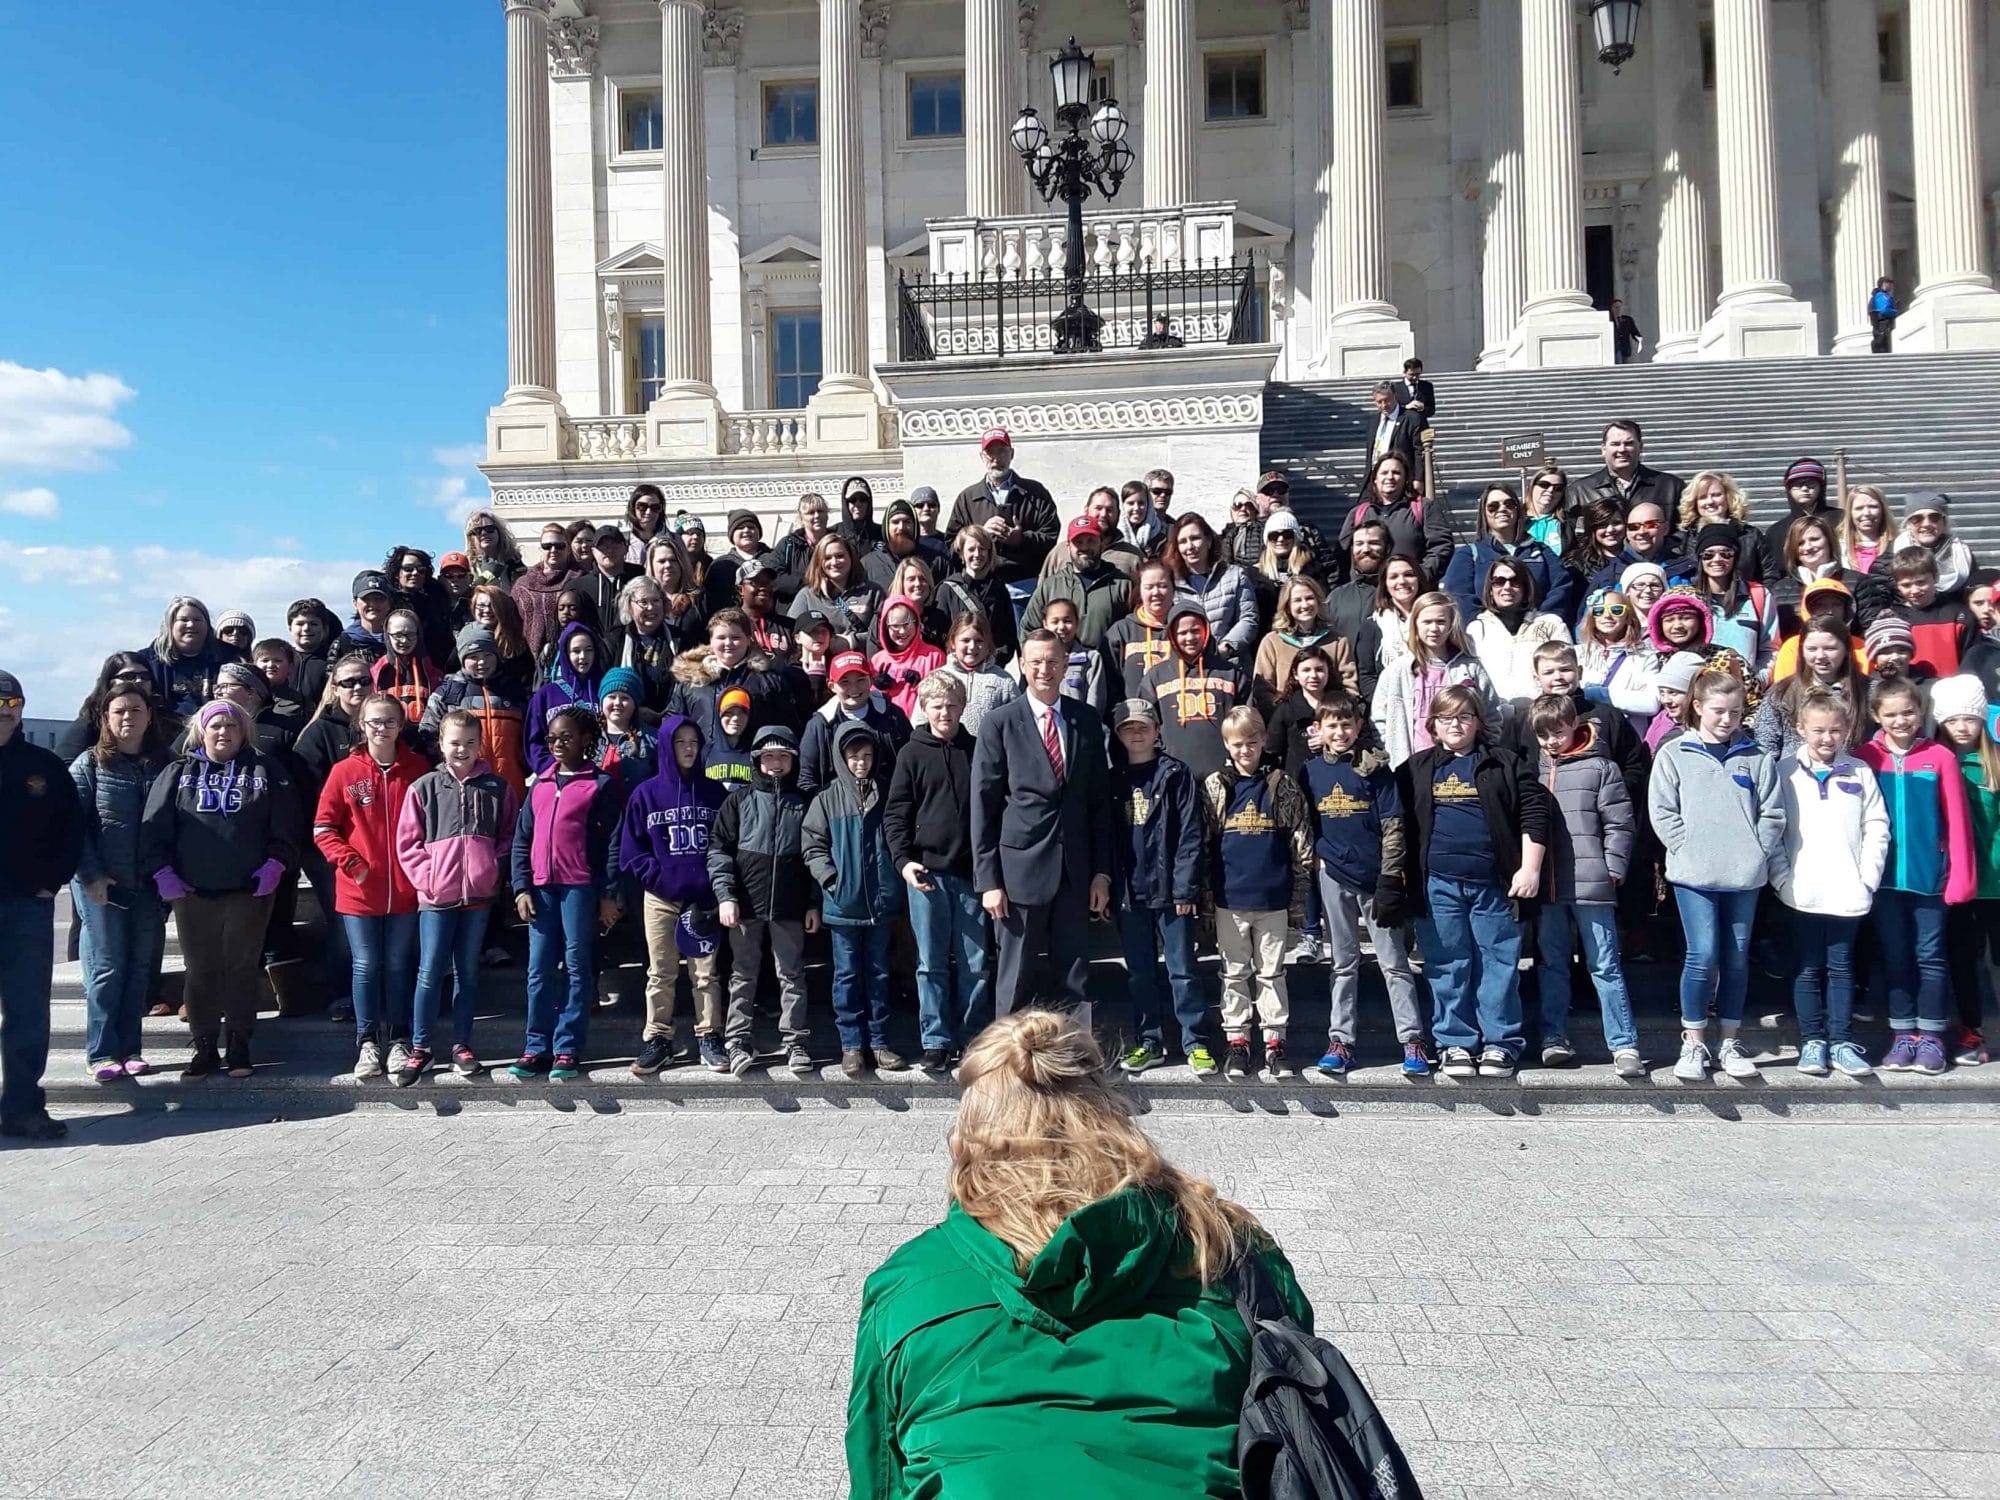 Meeting Rep Lewis on the steps of the US Capitol